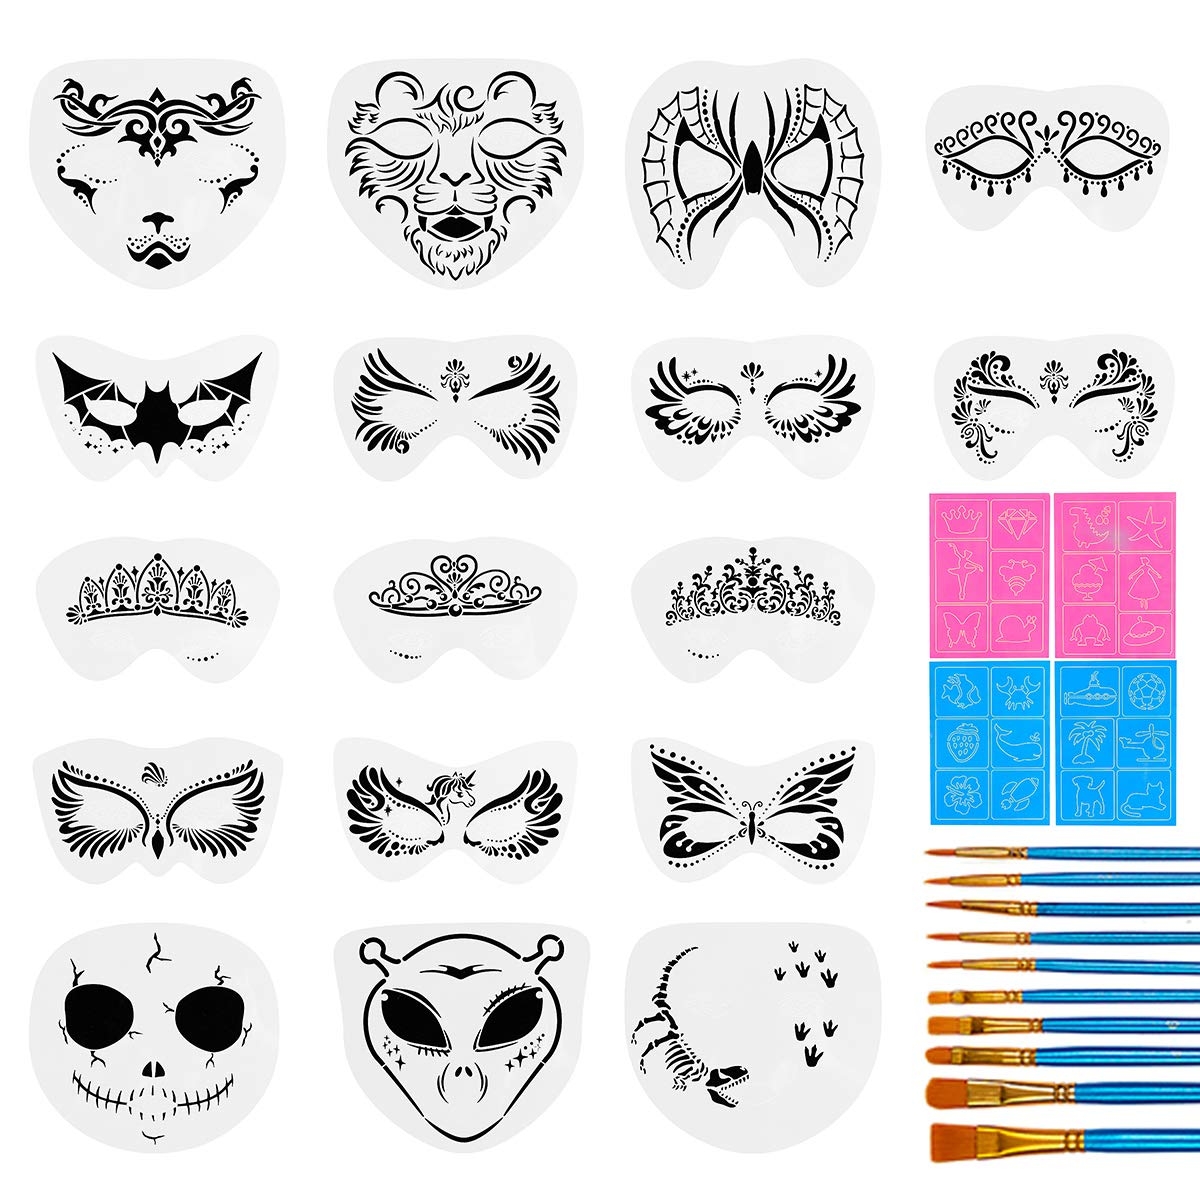 Amazon 31 Pieces Face Stencils Kit 17 Reusable Large Face Paint Stencils 4 Small Stick Paint Stencils And 10 Pieces Painting Brushes For Kids Face Painting Tattoo Stencils Holiday Halloween Makeup 